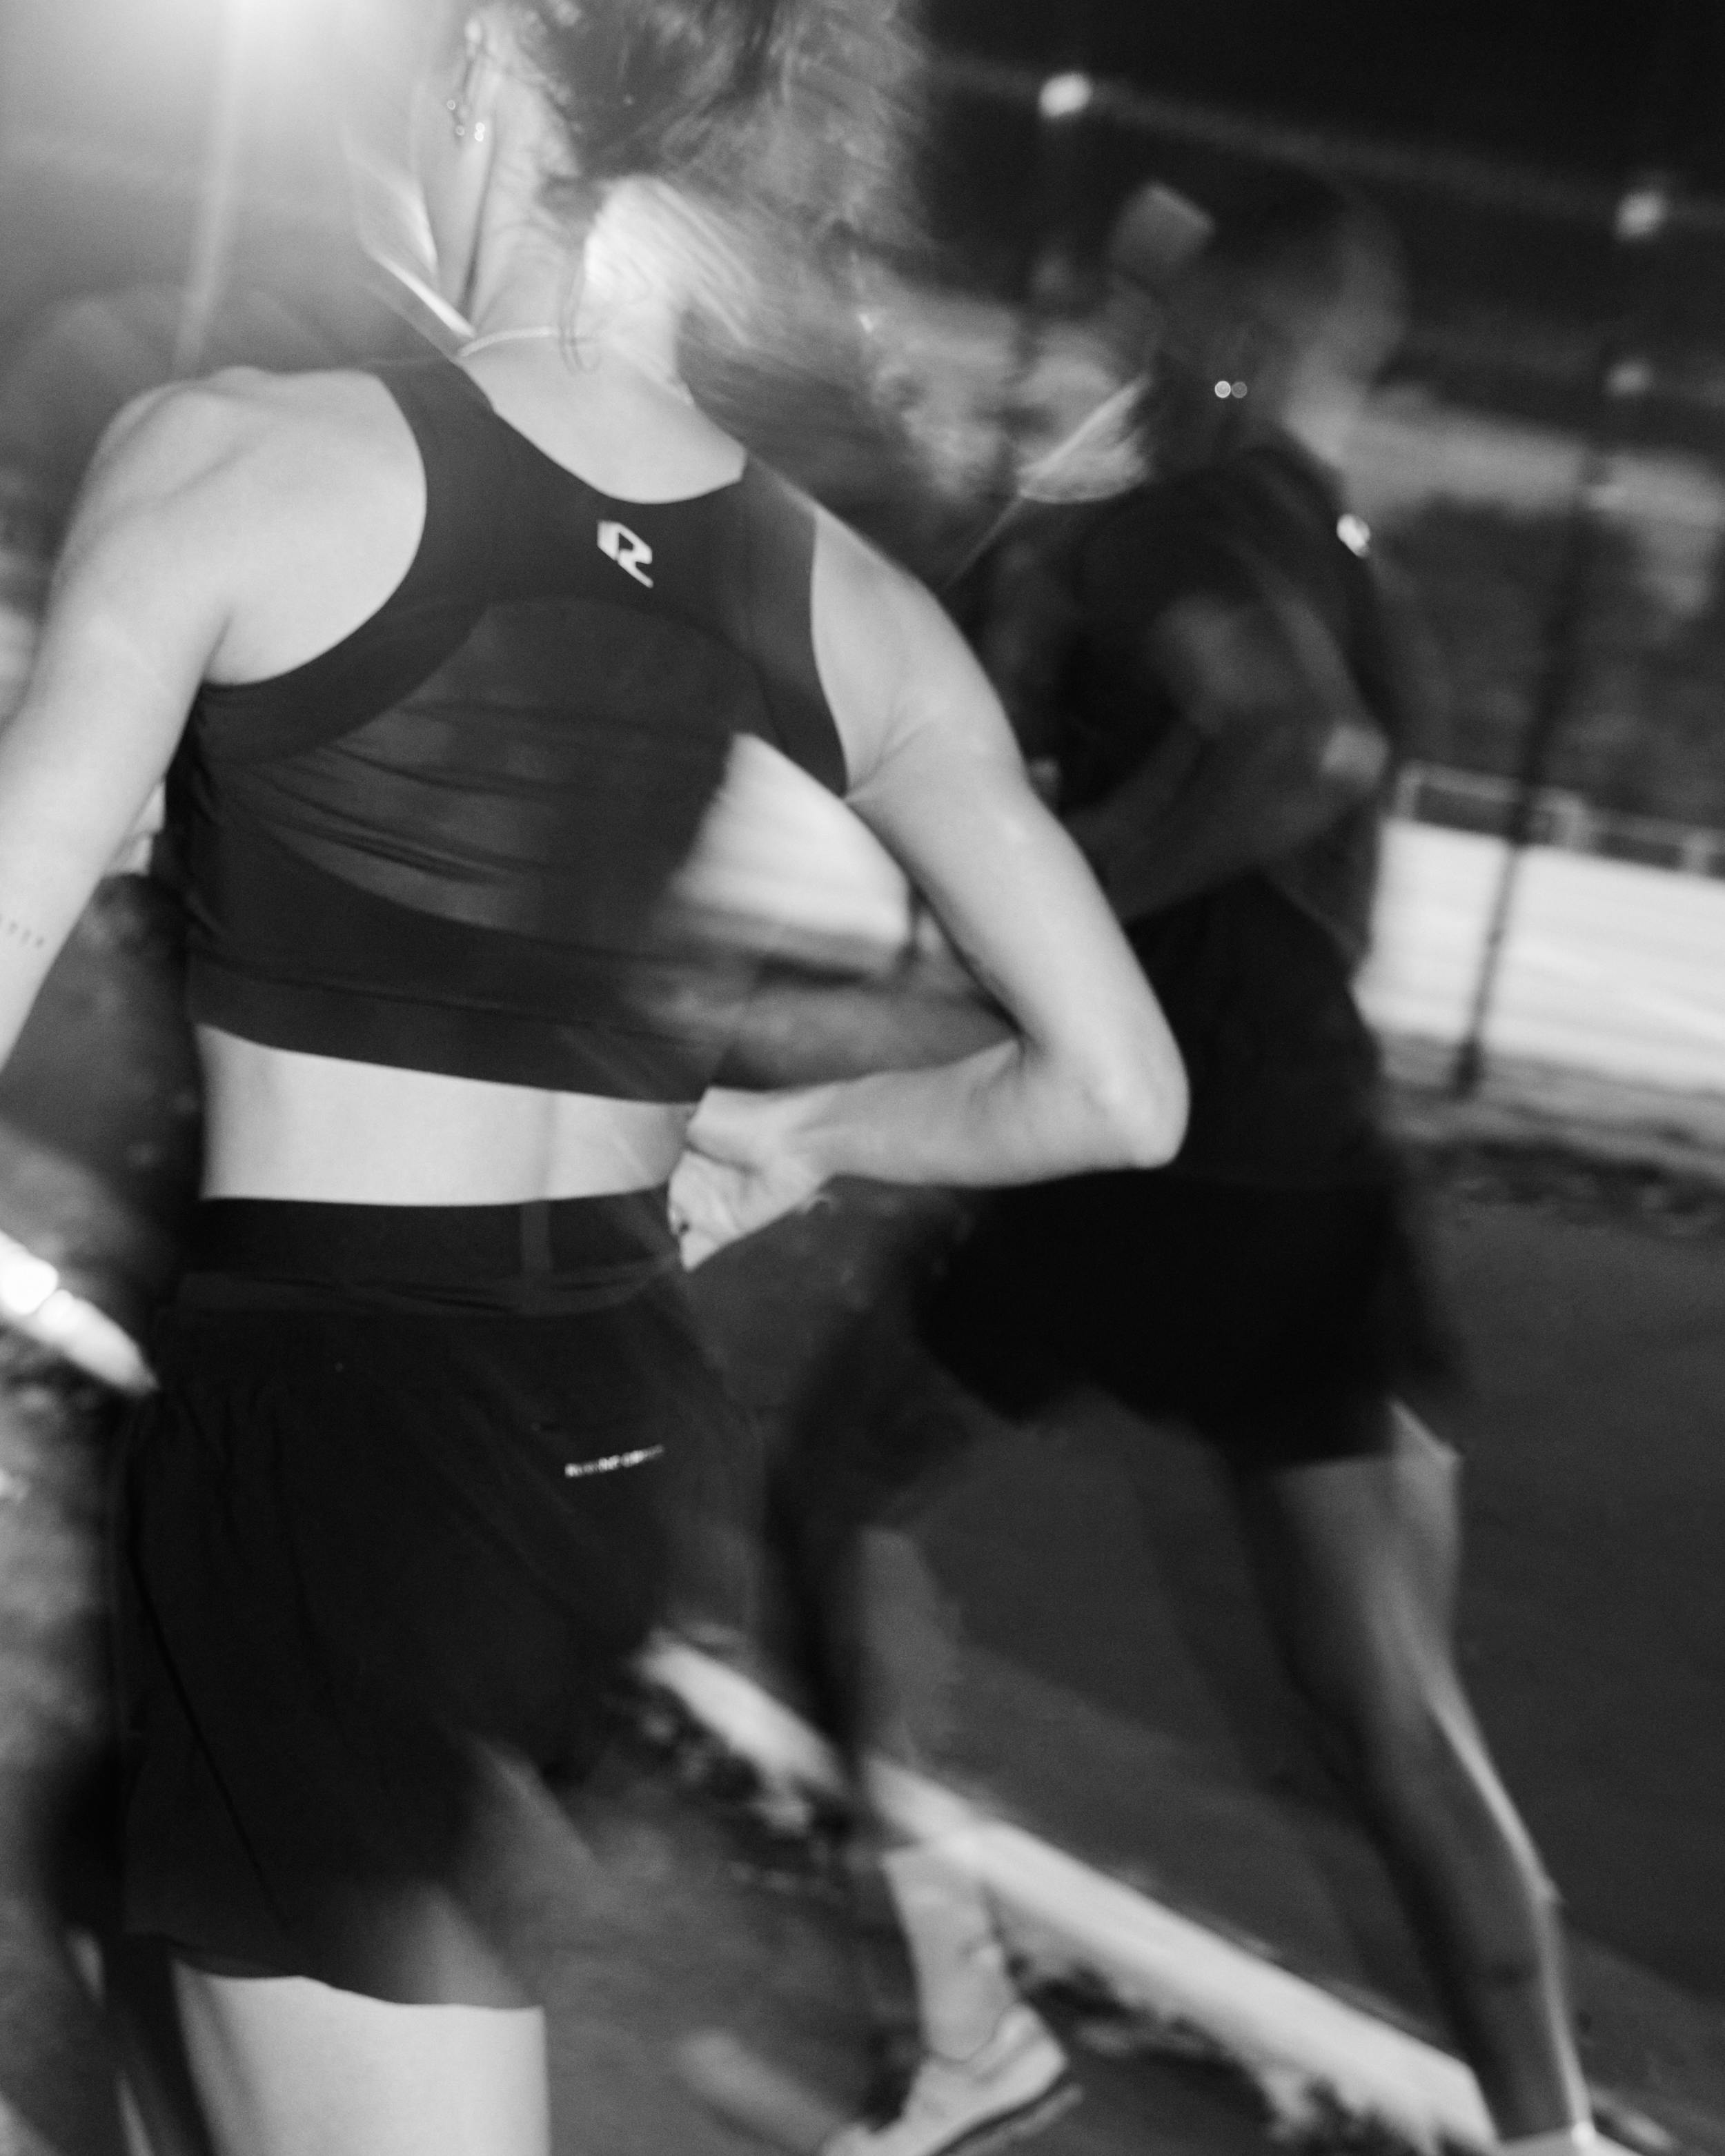 BERLIN NIGHT RUN - COLLECTION 02 - Photographed by Jack Hare